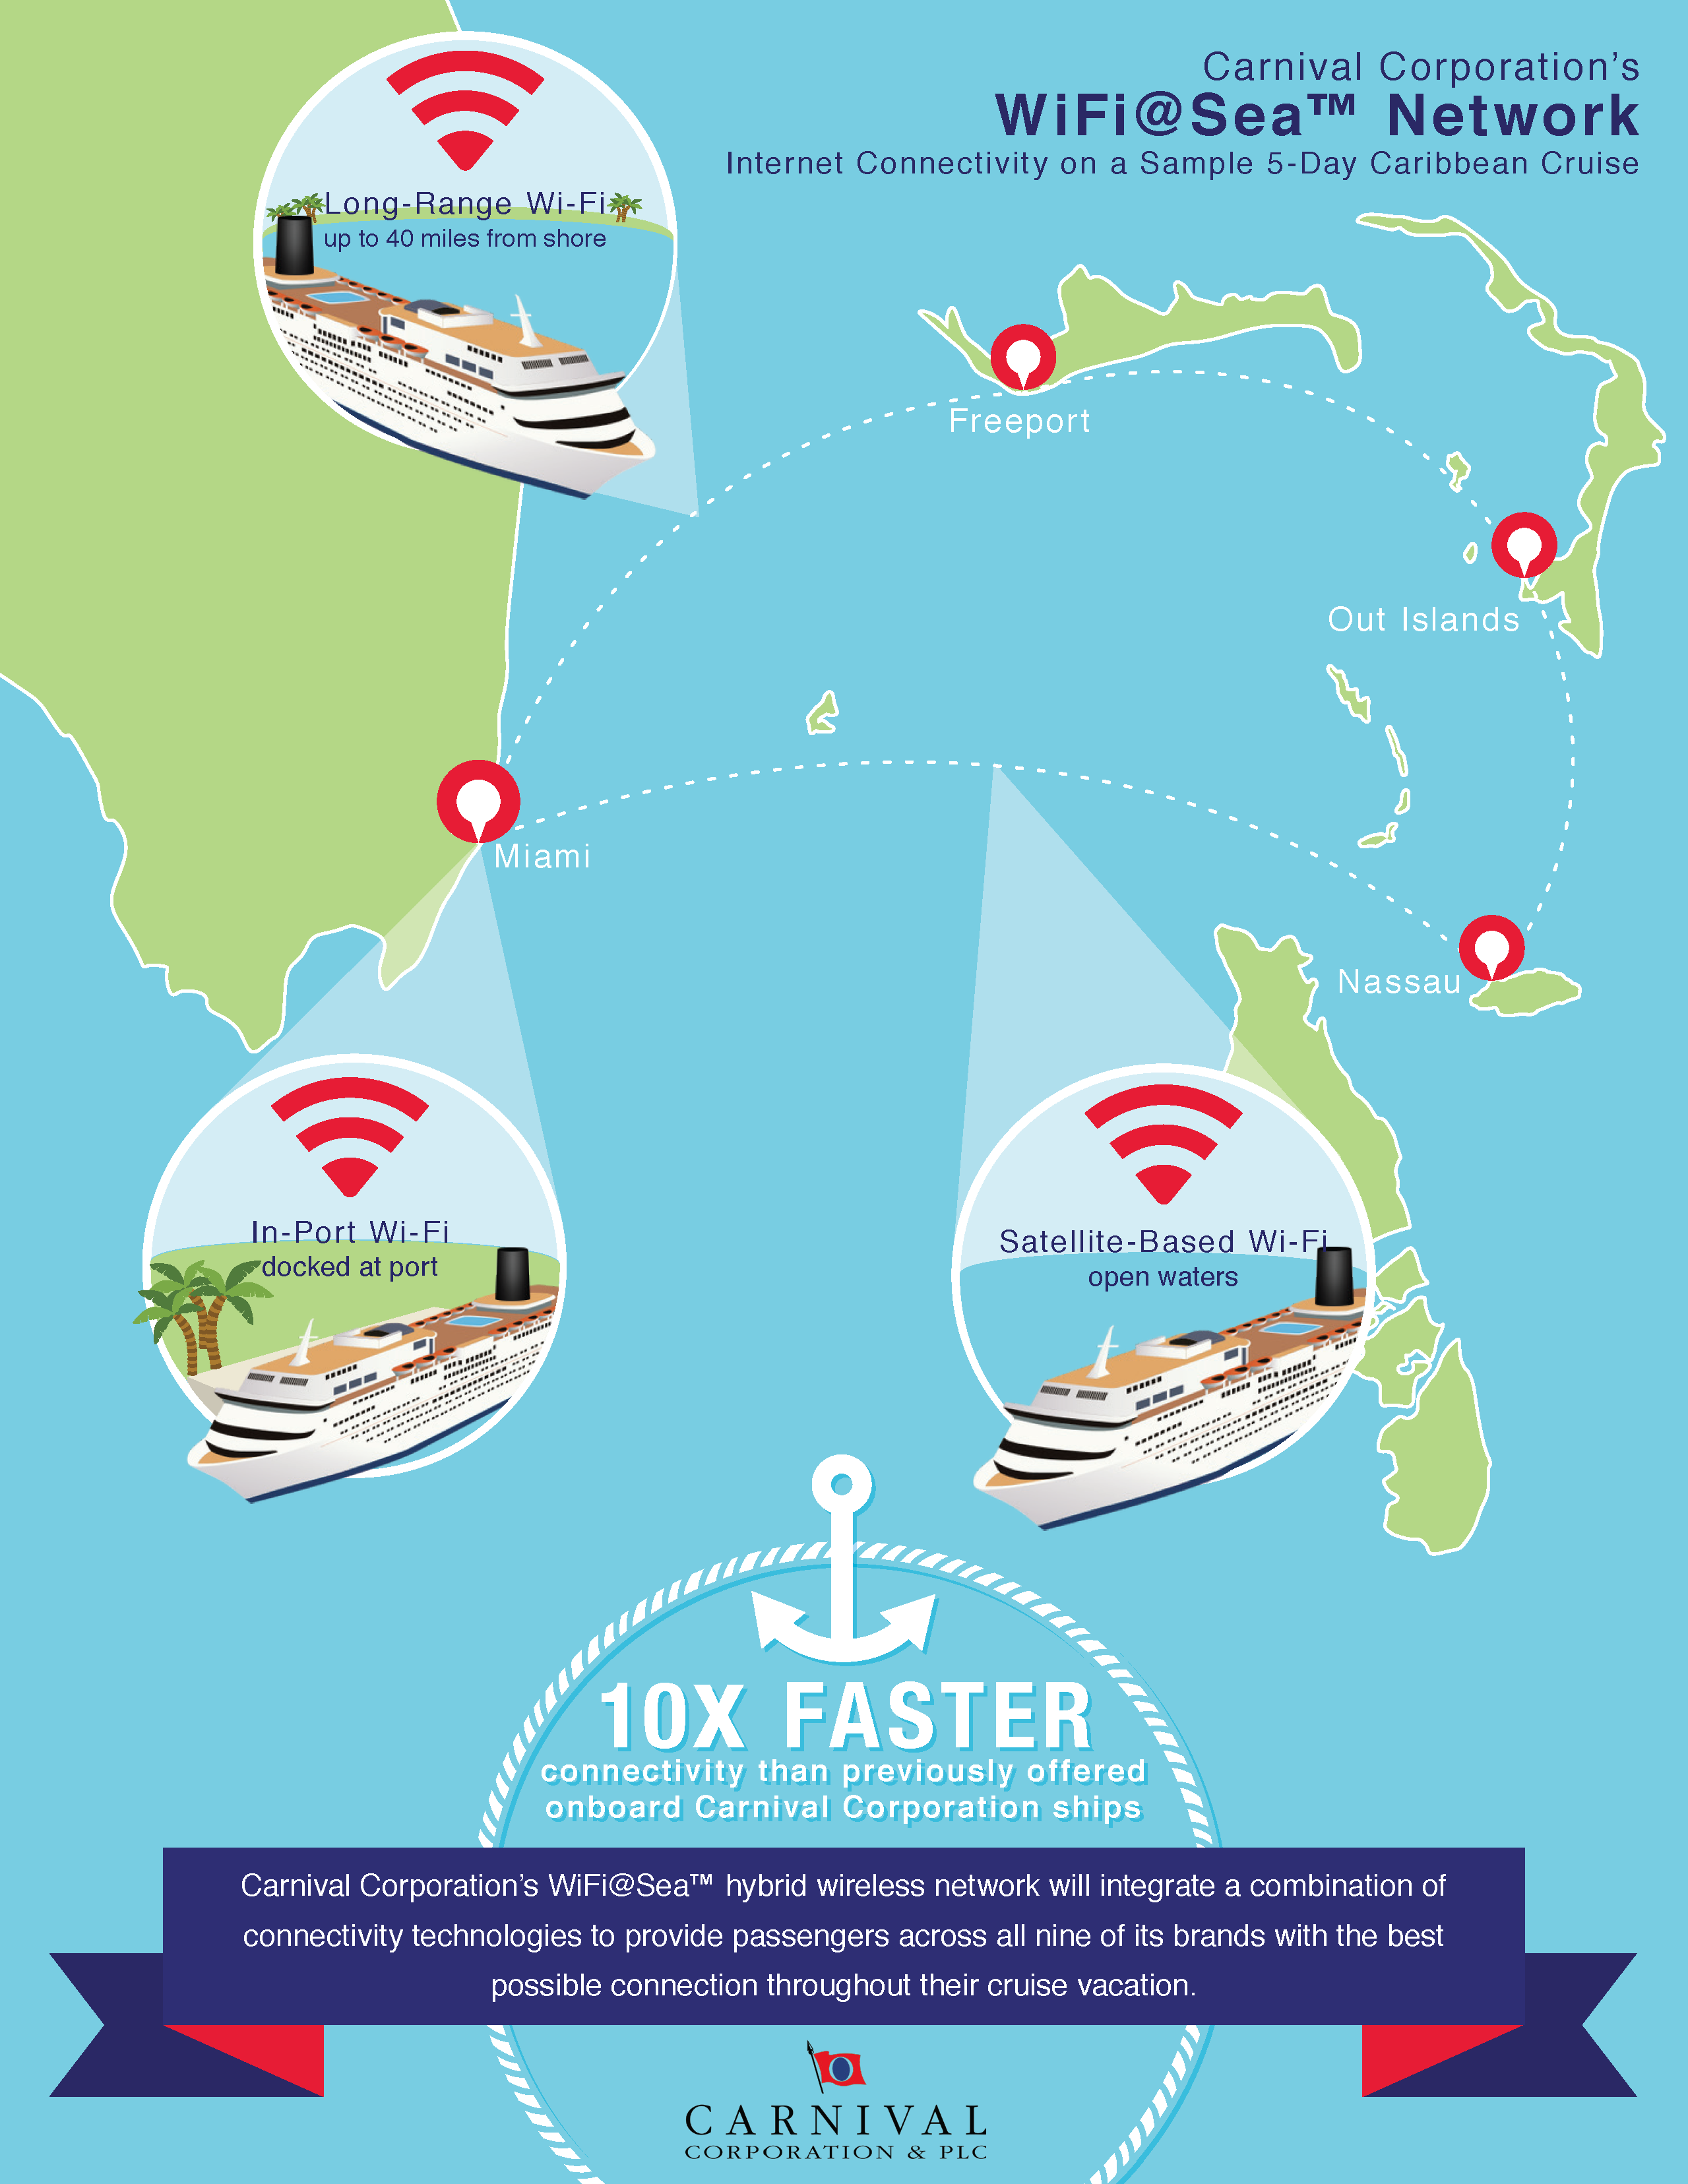 Carnival Corporation's new WiFi@Sea provides 10x faster speeds than previously available.